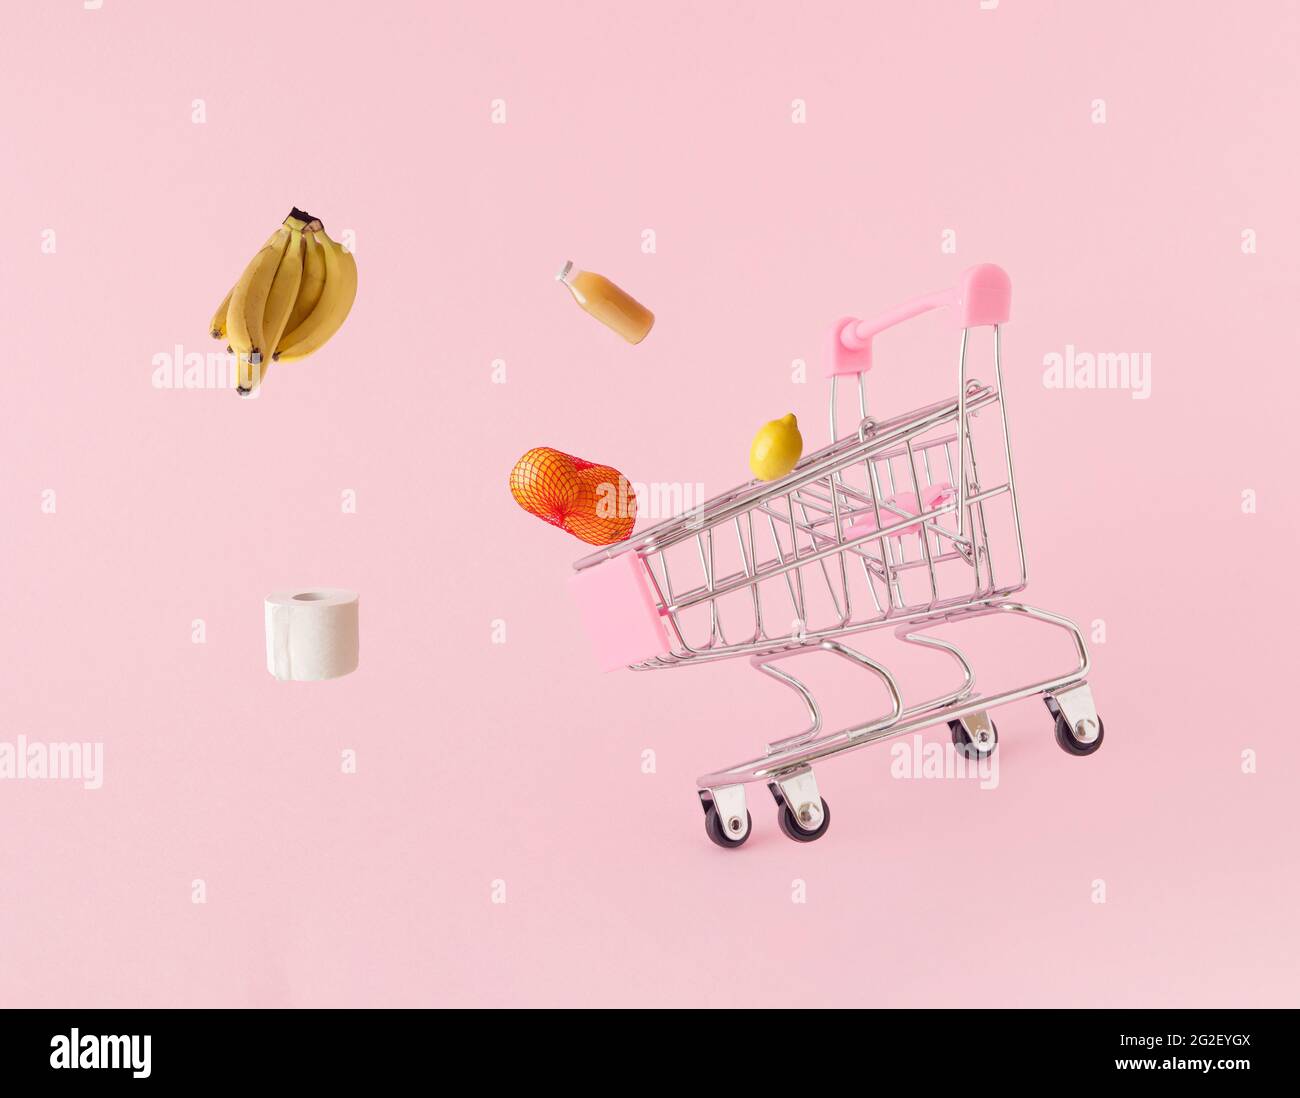 A shopping cart from which different types of food and toilet paper fly on a pink background. Bananas, oranges, juice, lemons fly in several direction Stock Photo